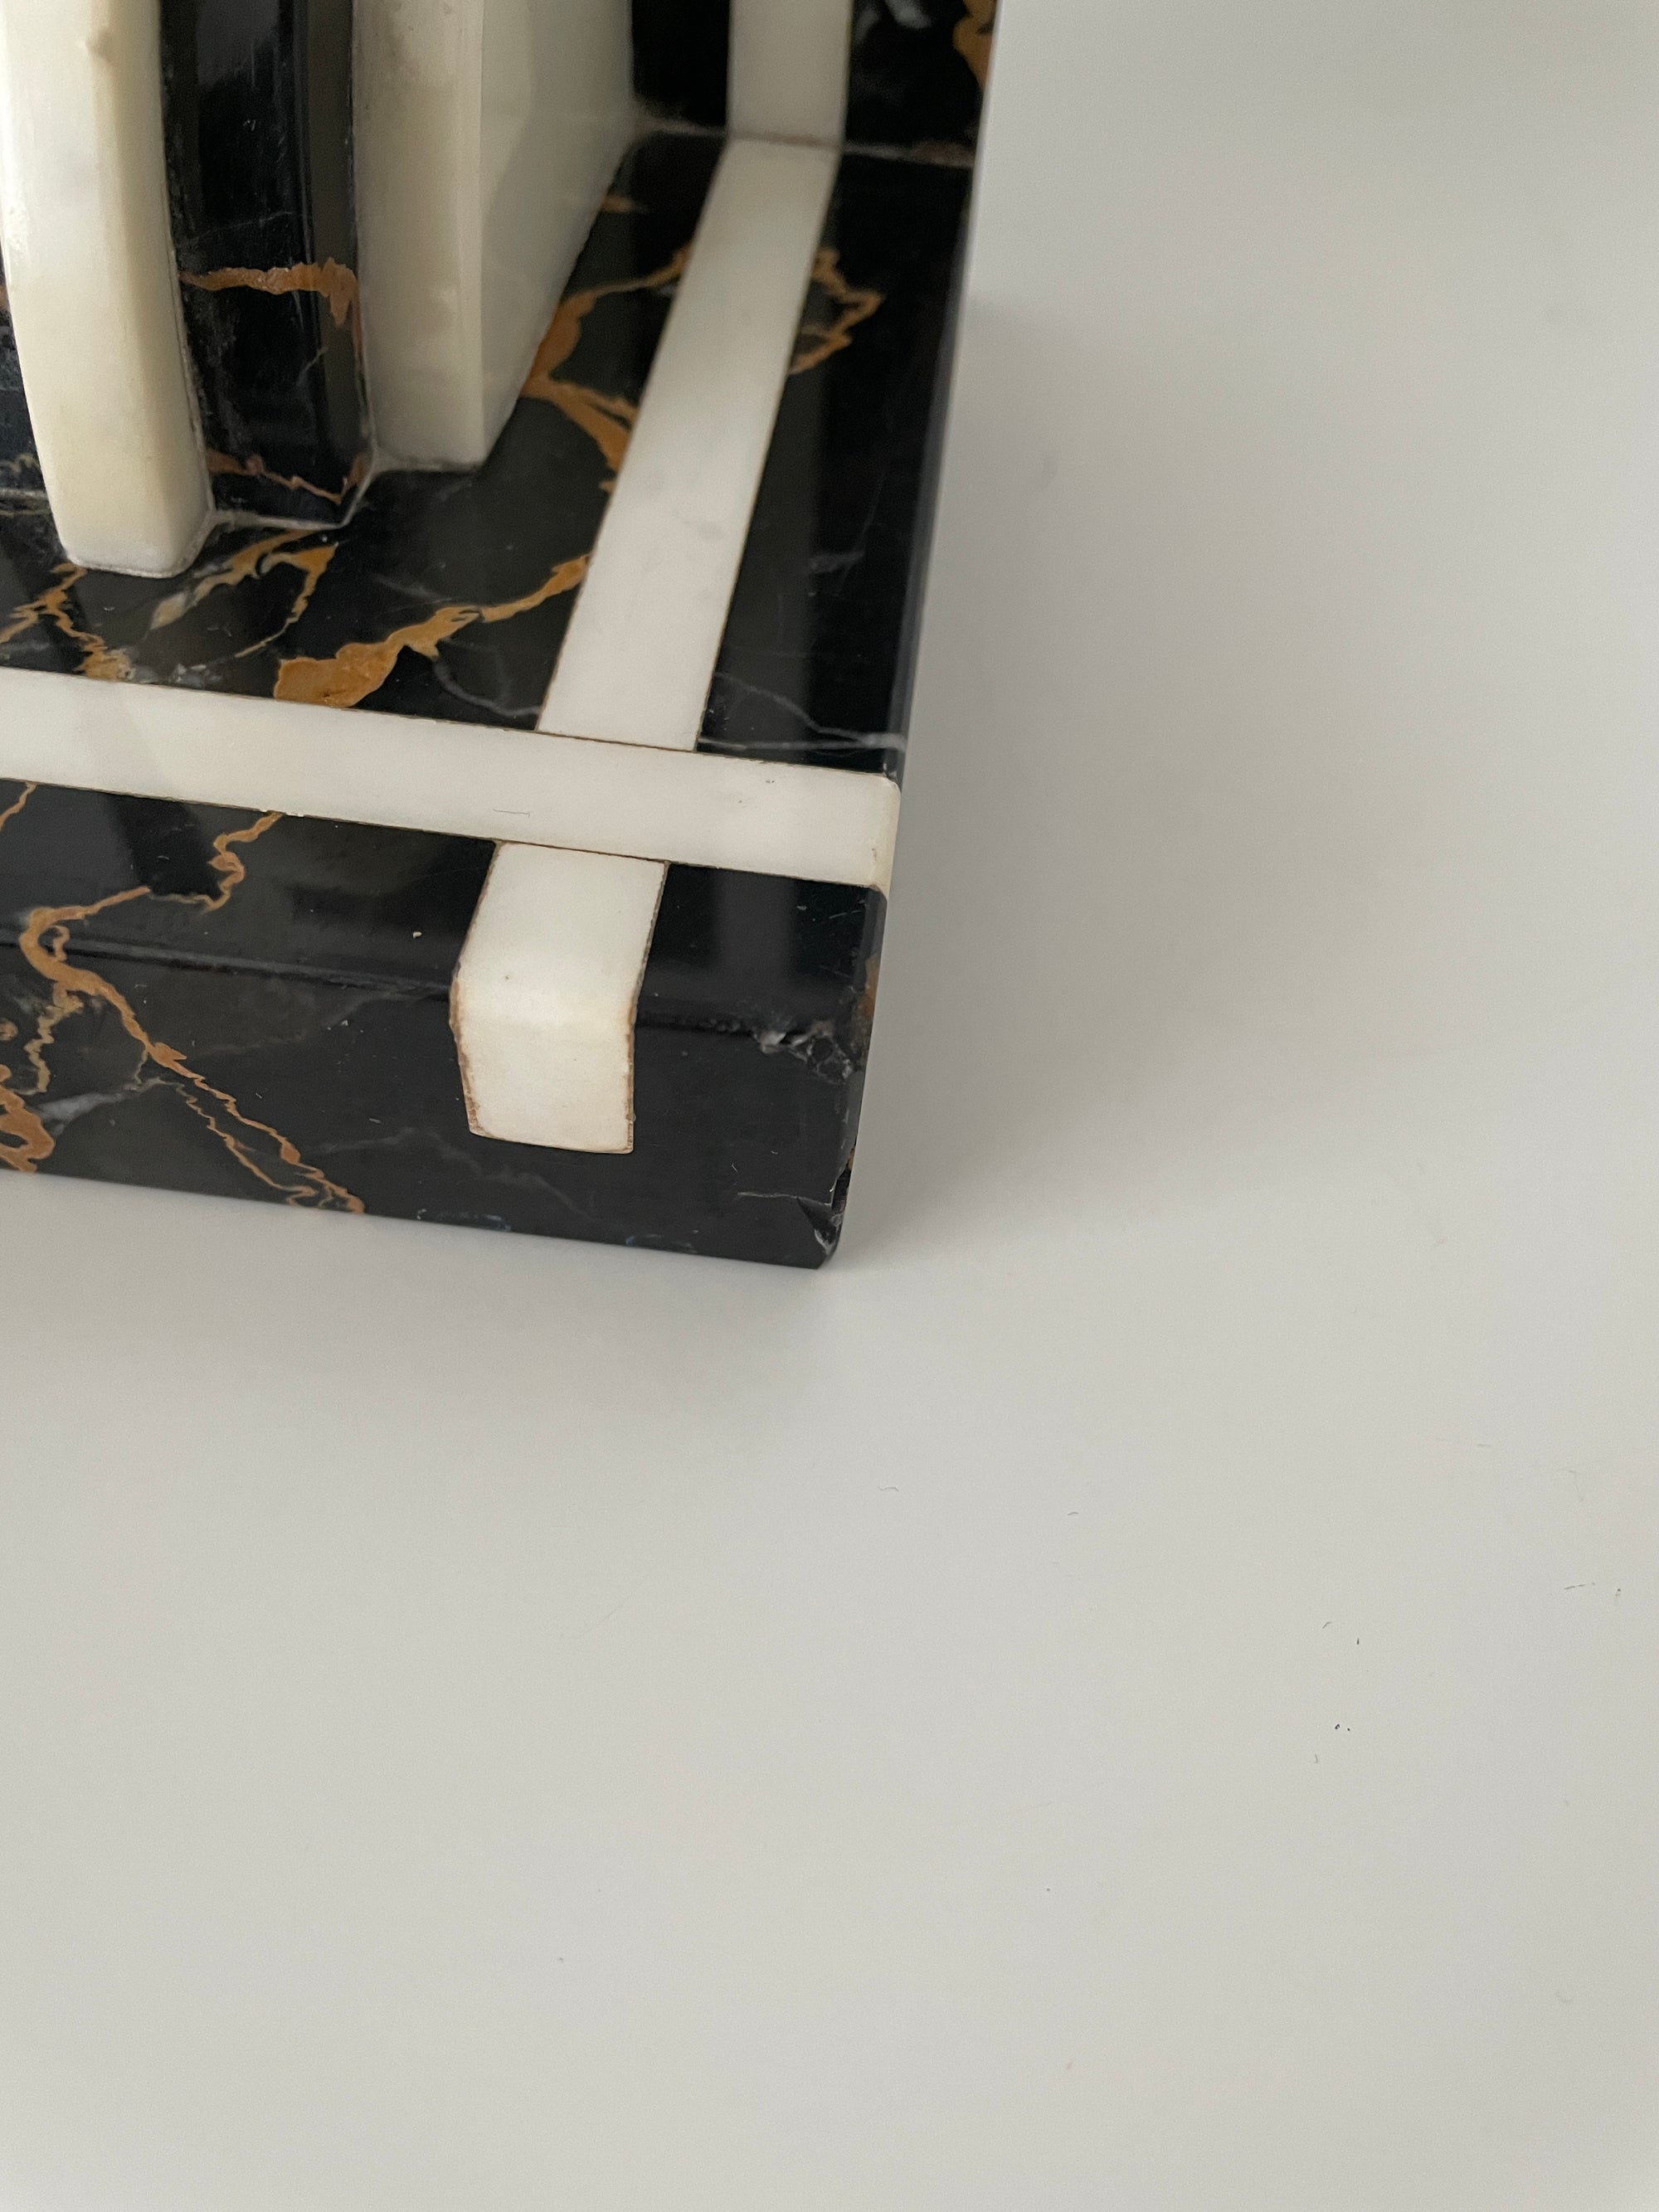 Art Deco Marble Bookends